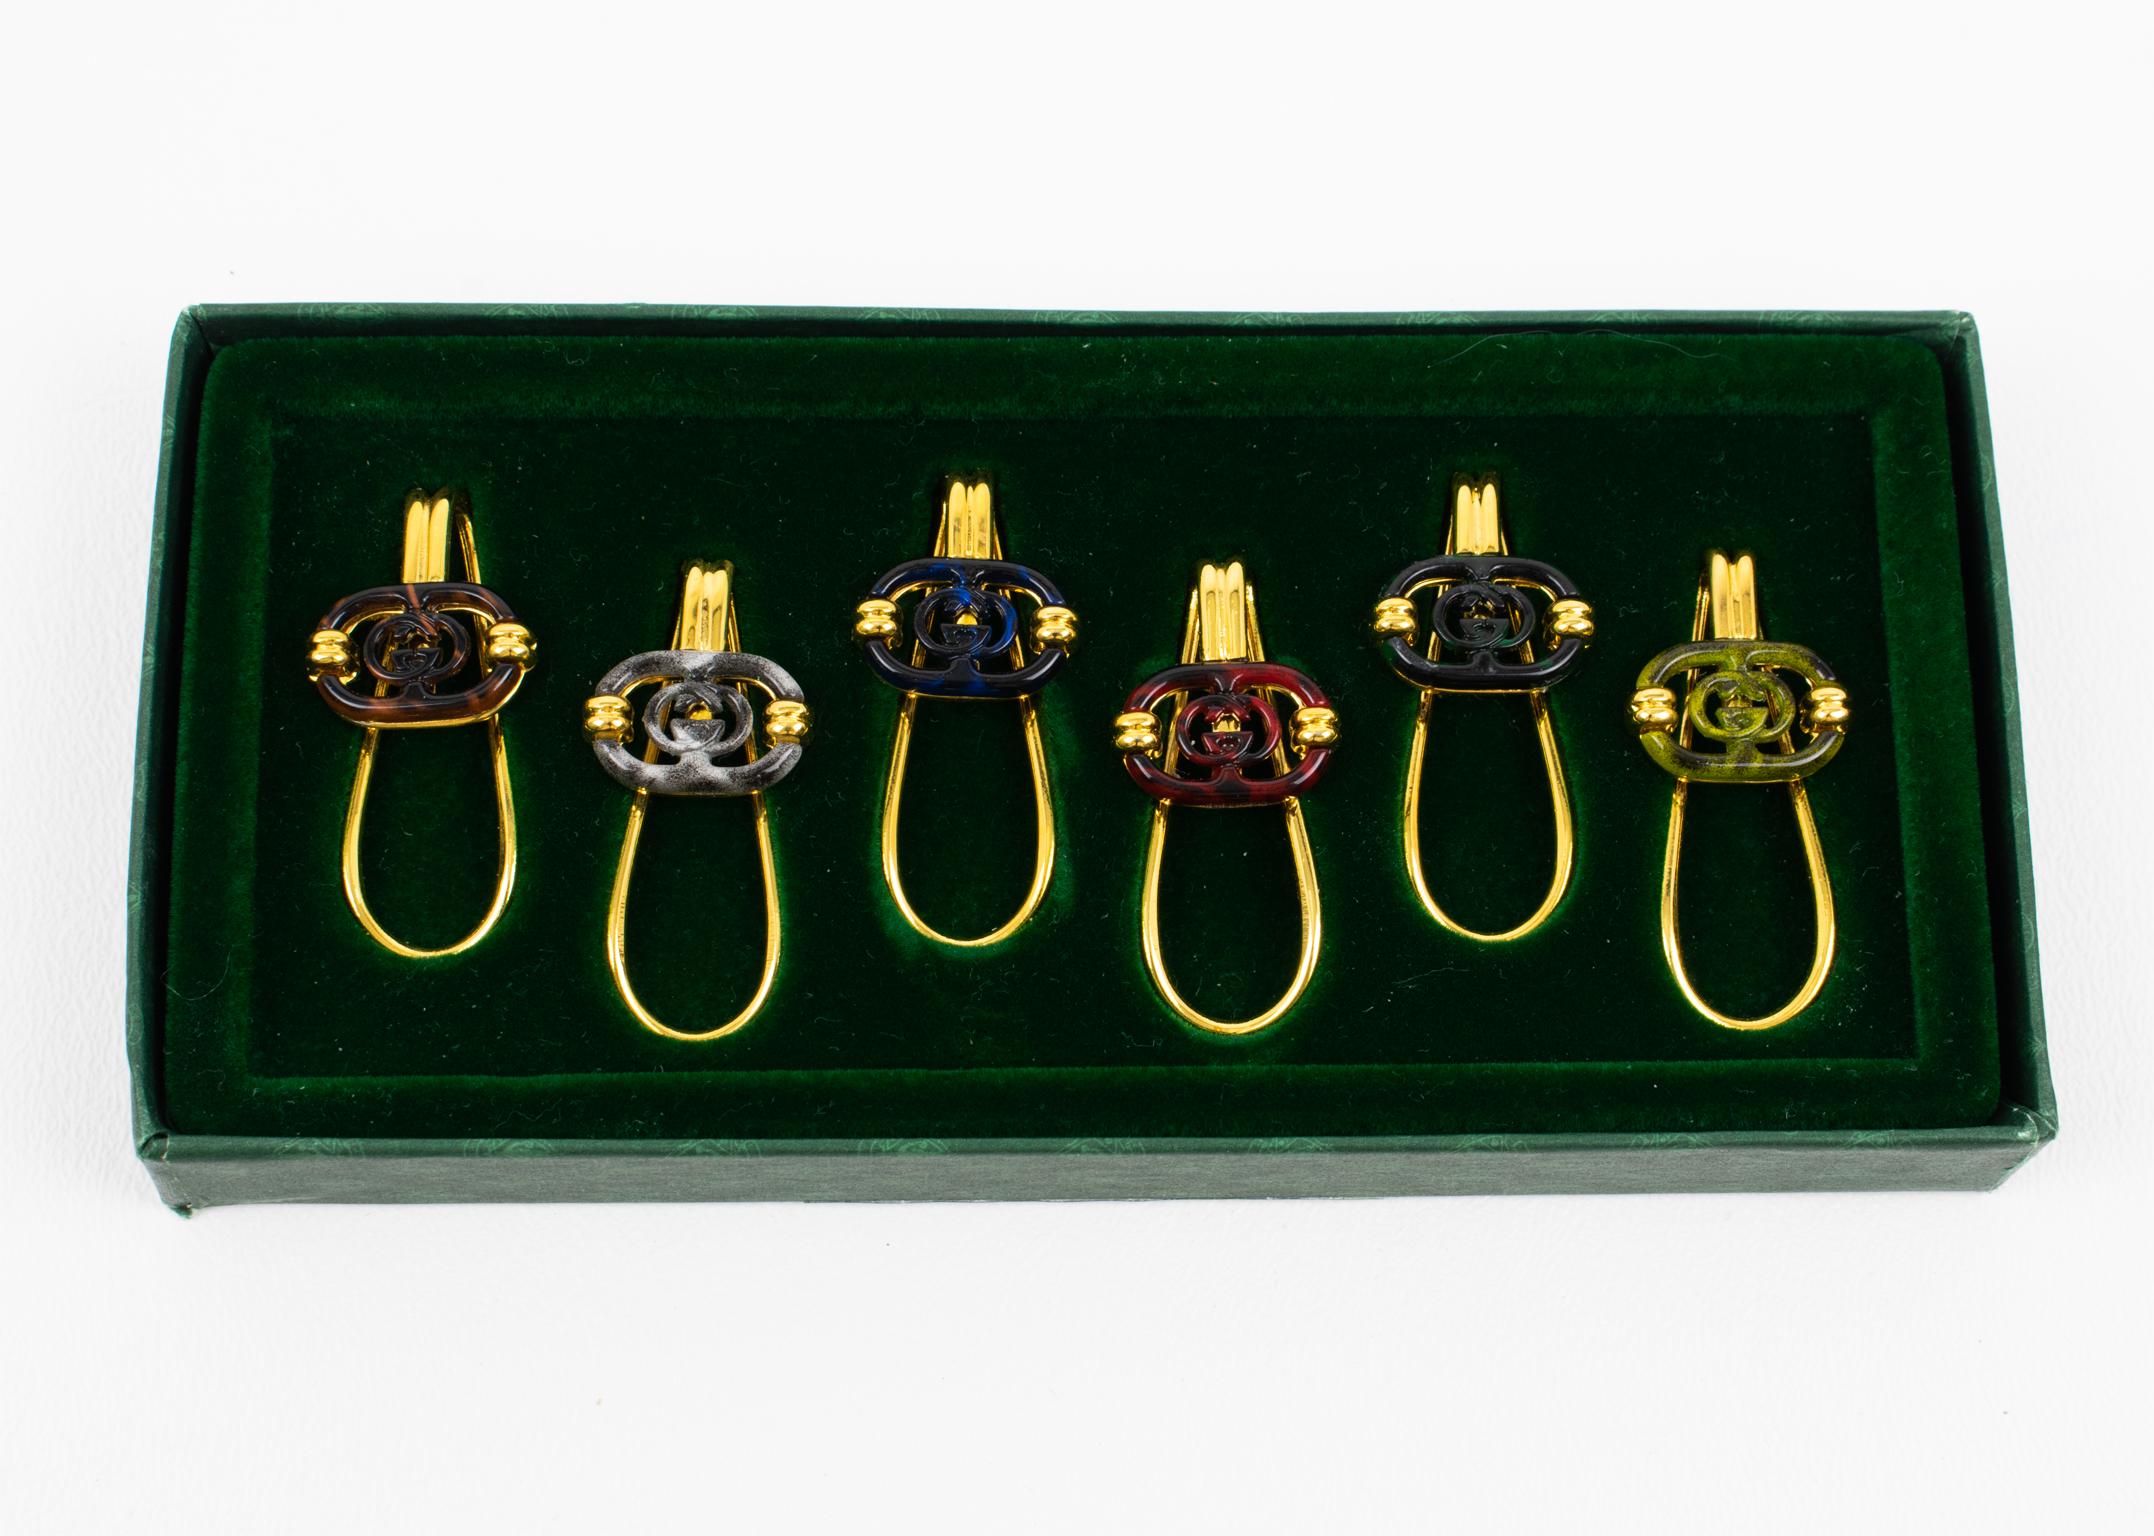 This gorgeous and ultra-rare Gucci barware gold plated and enamel cocktail glass makers set from the 1980s is the perfect addition to any occasion. The set of six pieces comes in an original presentation box and includes authentic glass charms in